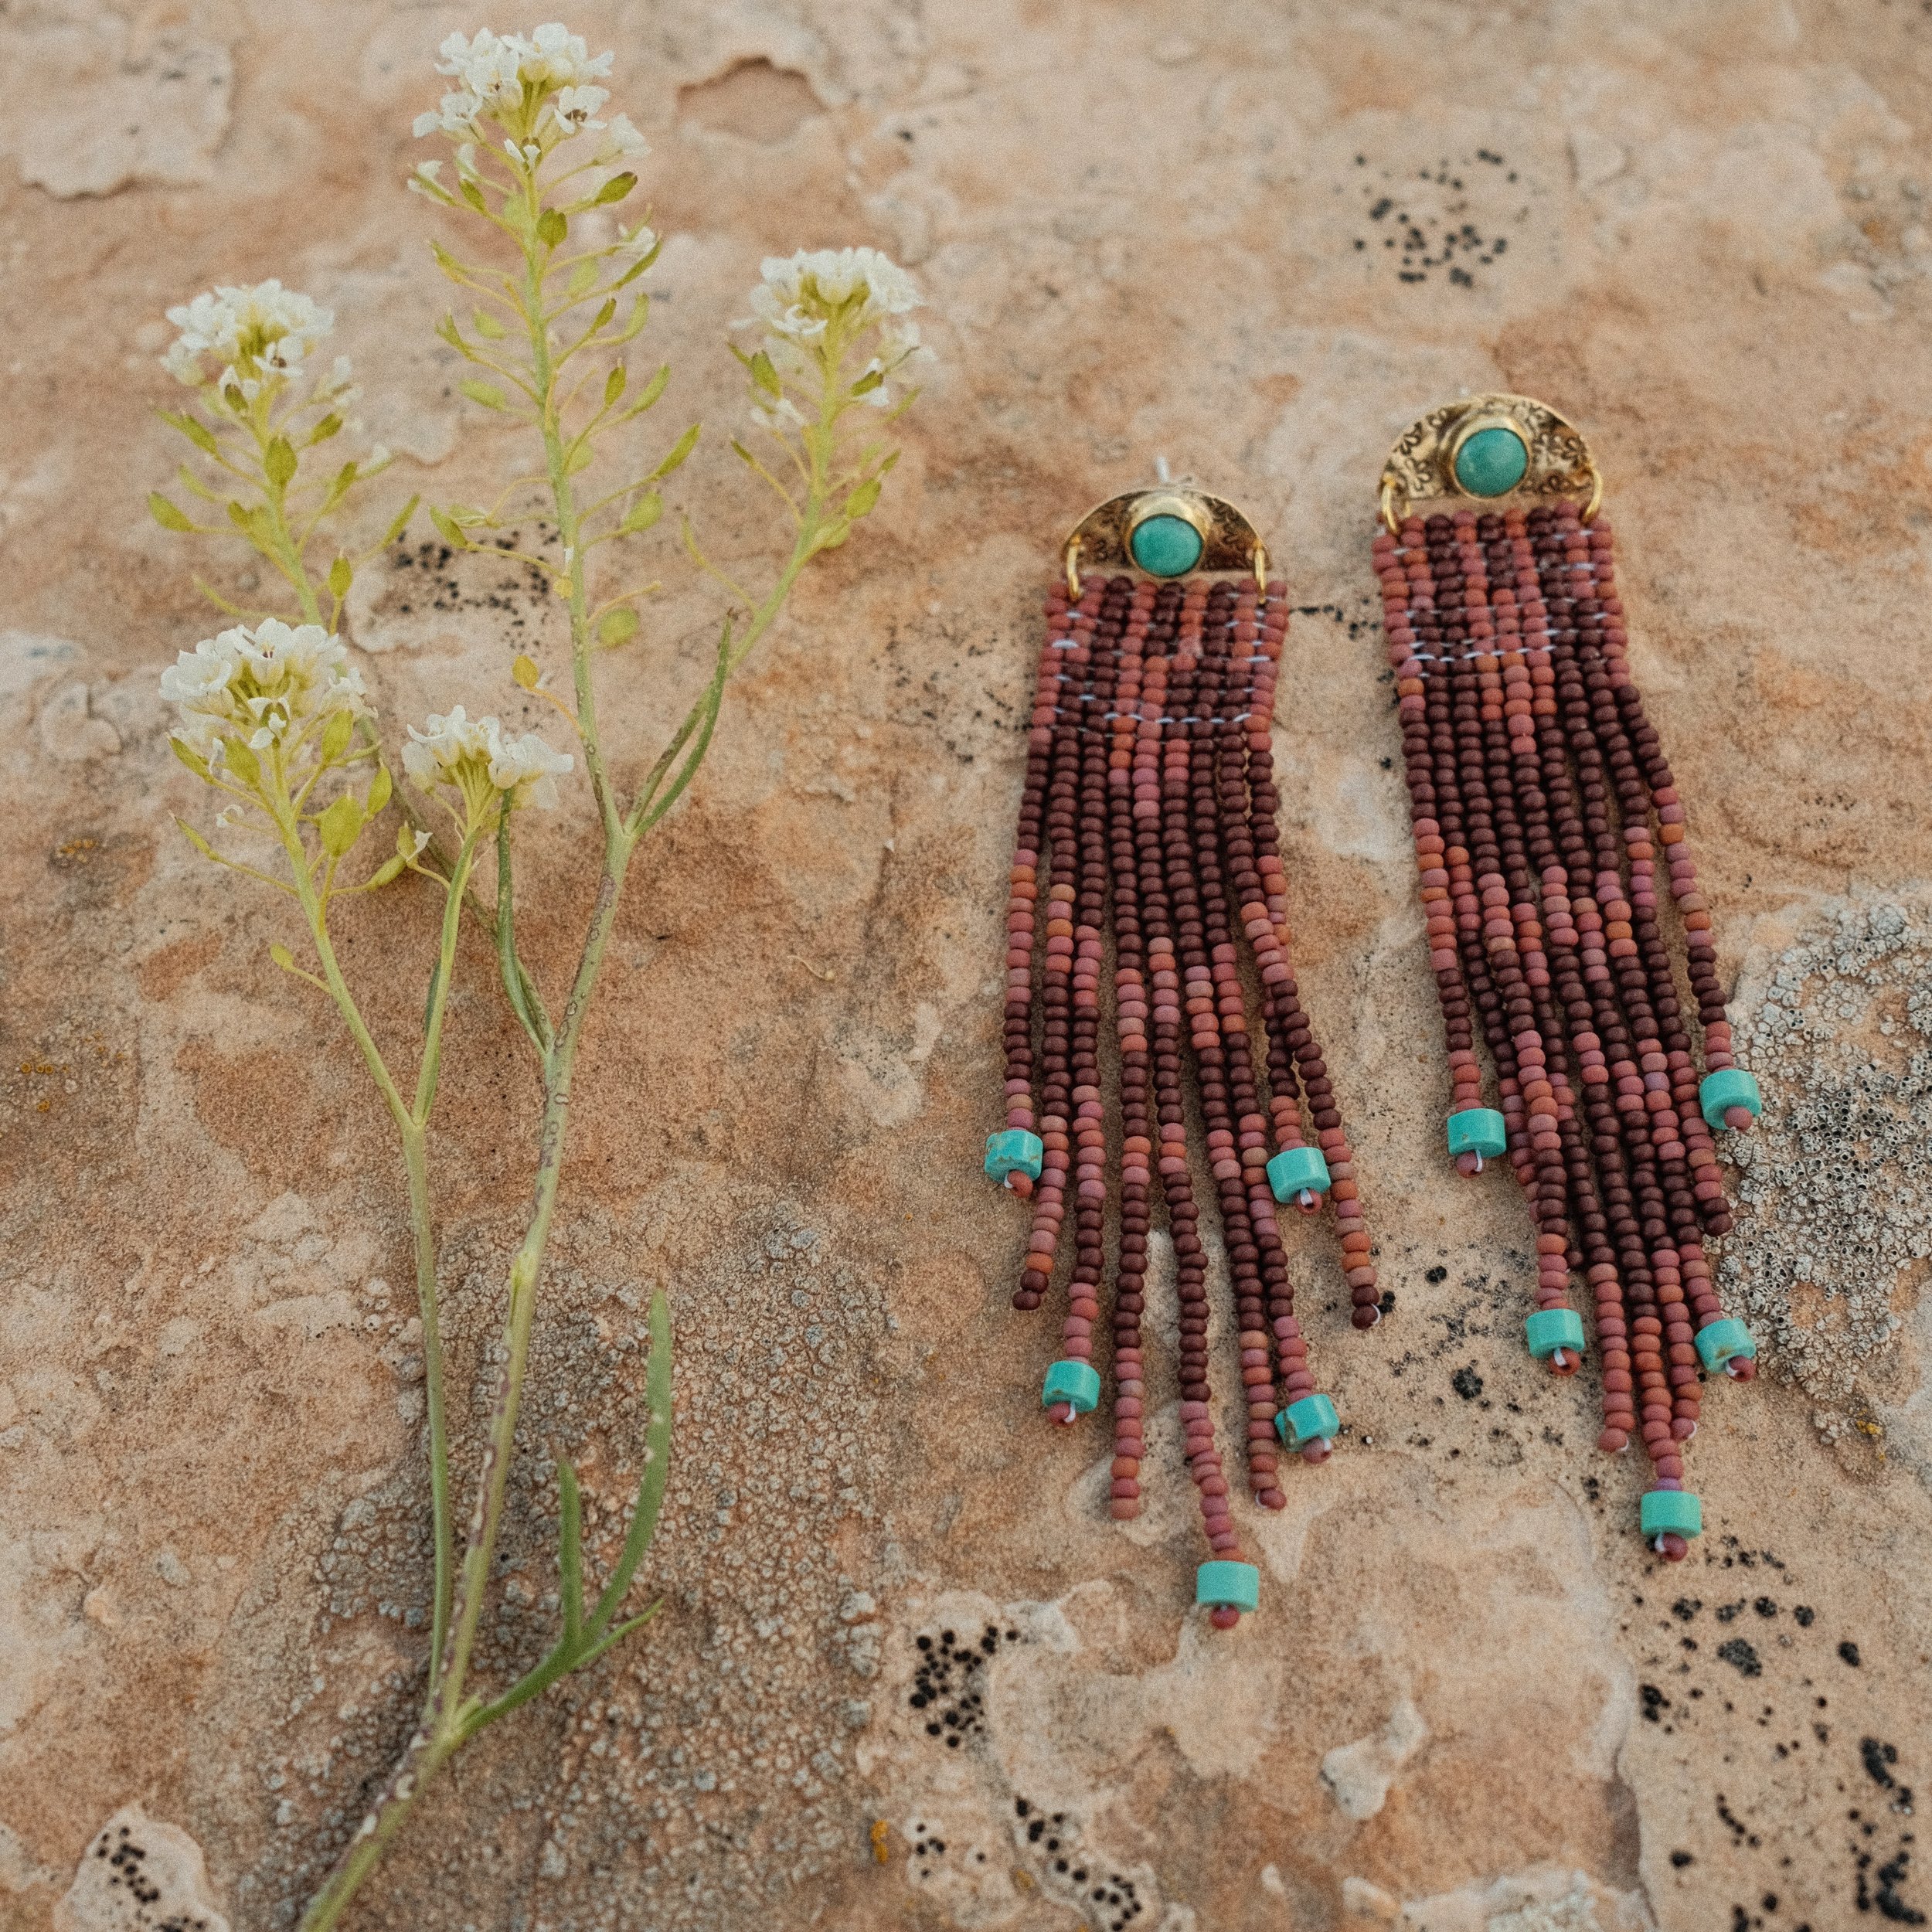 took some cute photos in the desert this weekend 🏜️my next mini collection will be available May 19 🙂 

#handmadejewelry #metalsmith #metalsmithsociety #metalsmithjewelry #silversmithjewelry #slowcrafted #smallbusiness #madeinutah #desertinspired #